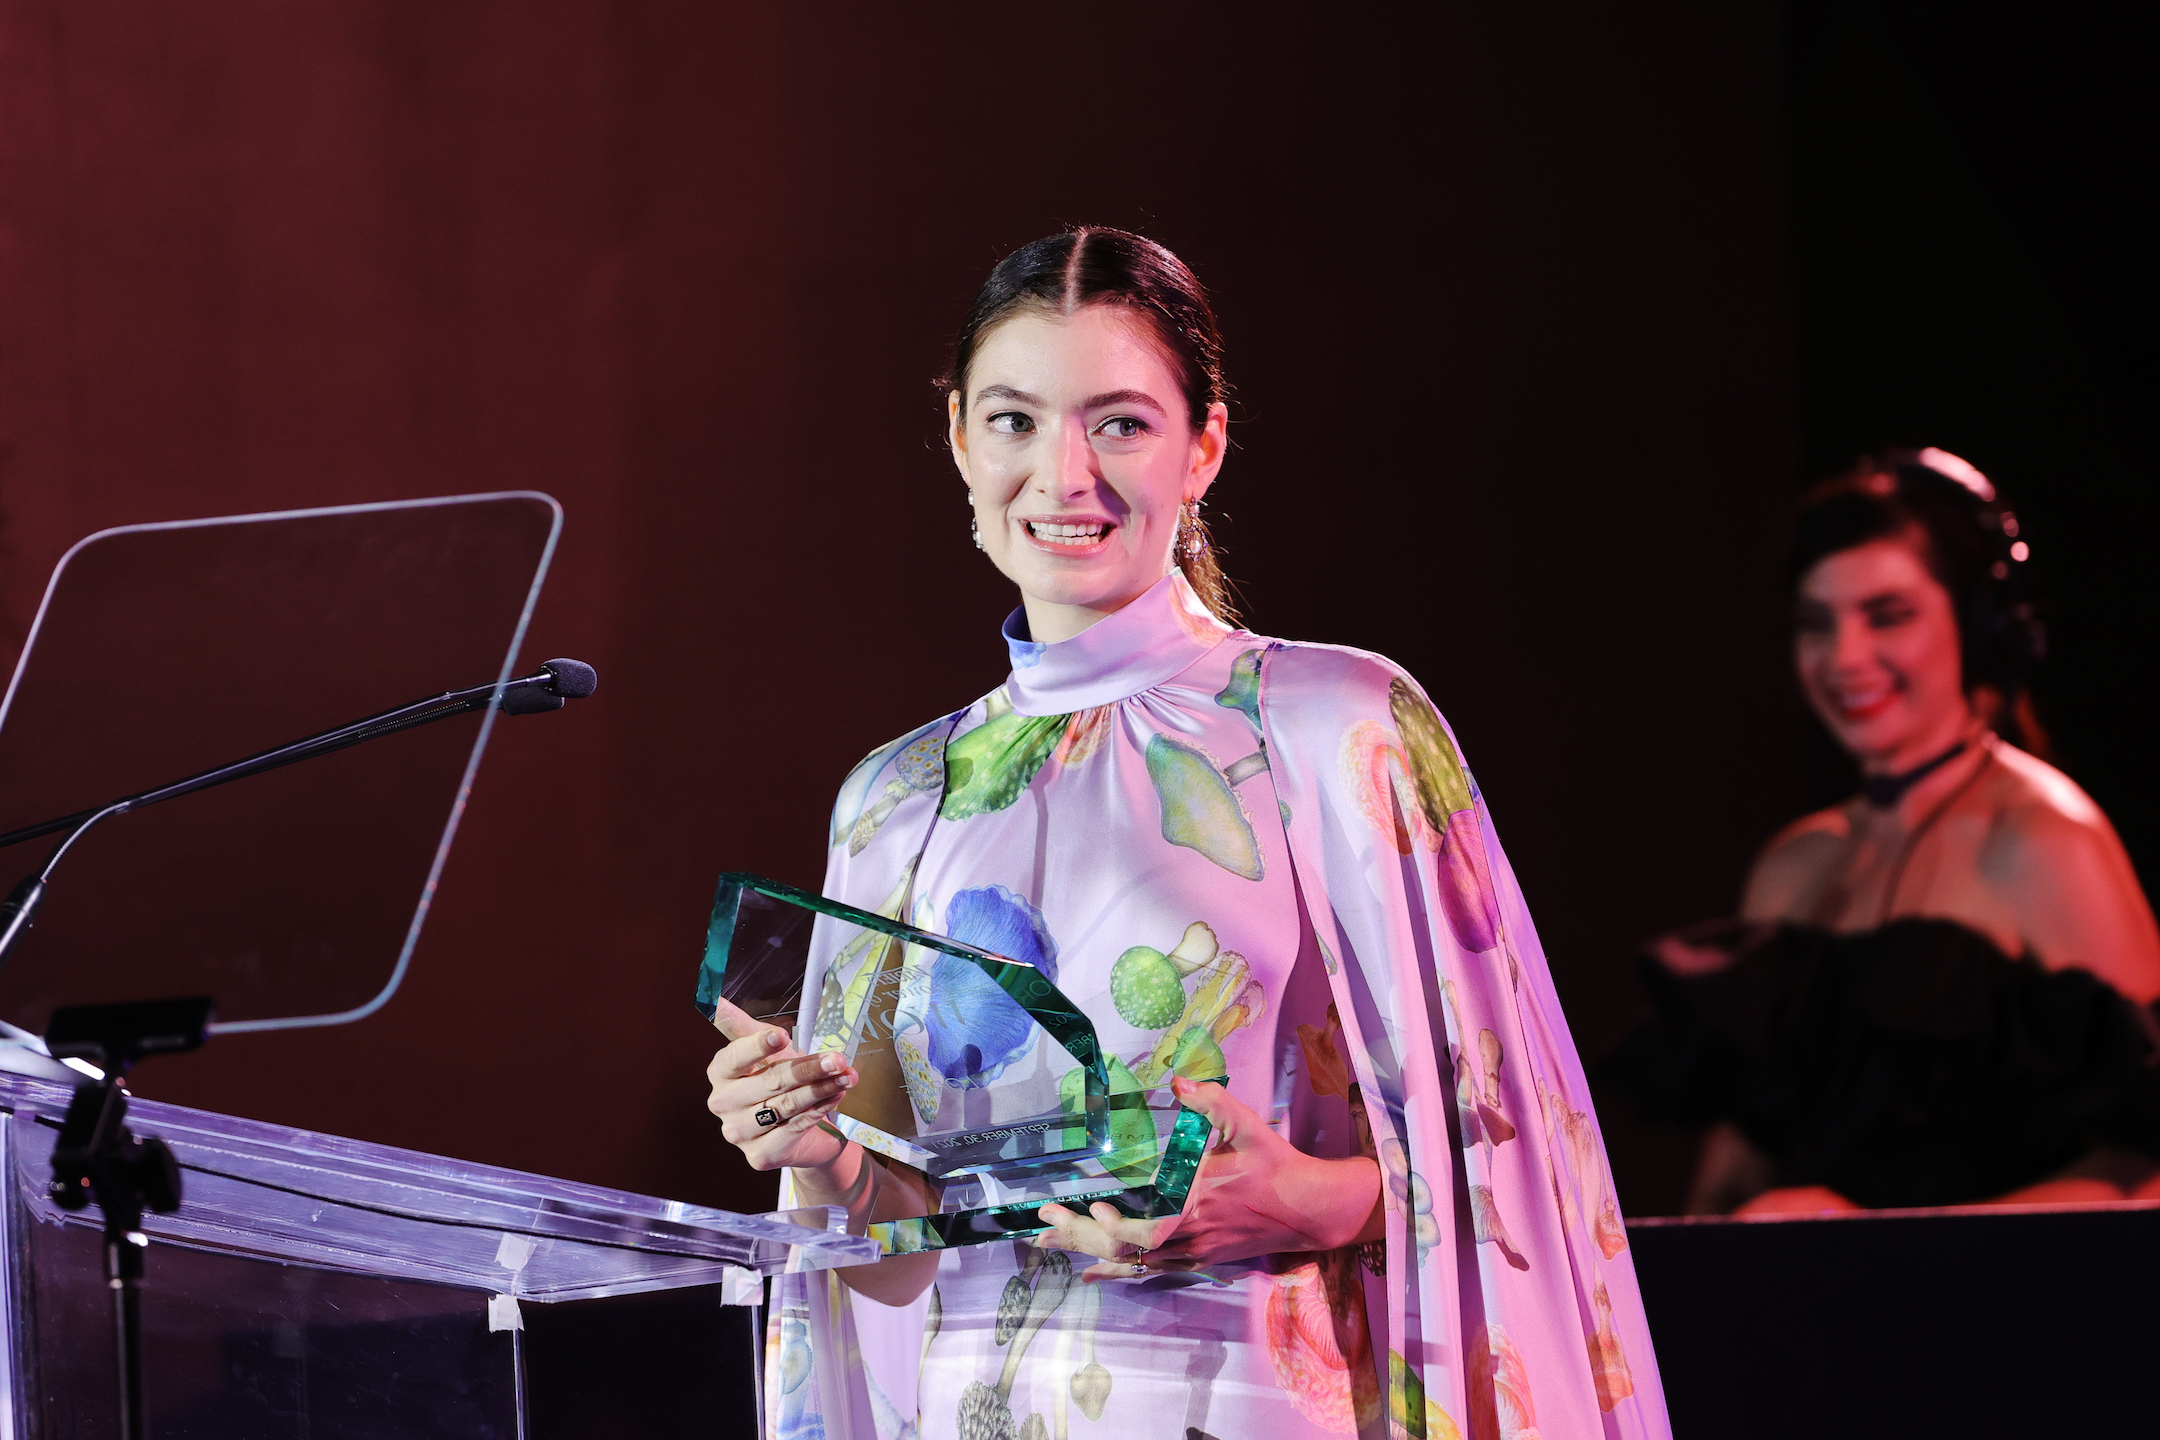 Honoree Lorde accepts an award on stage during attends Variety's Power of Women Presented by Lifetime